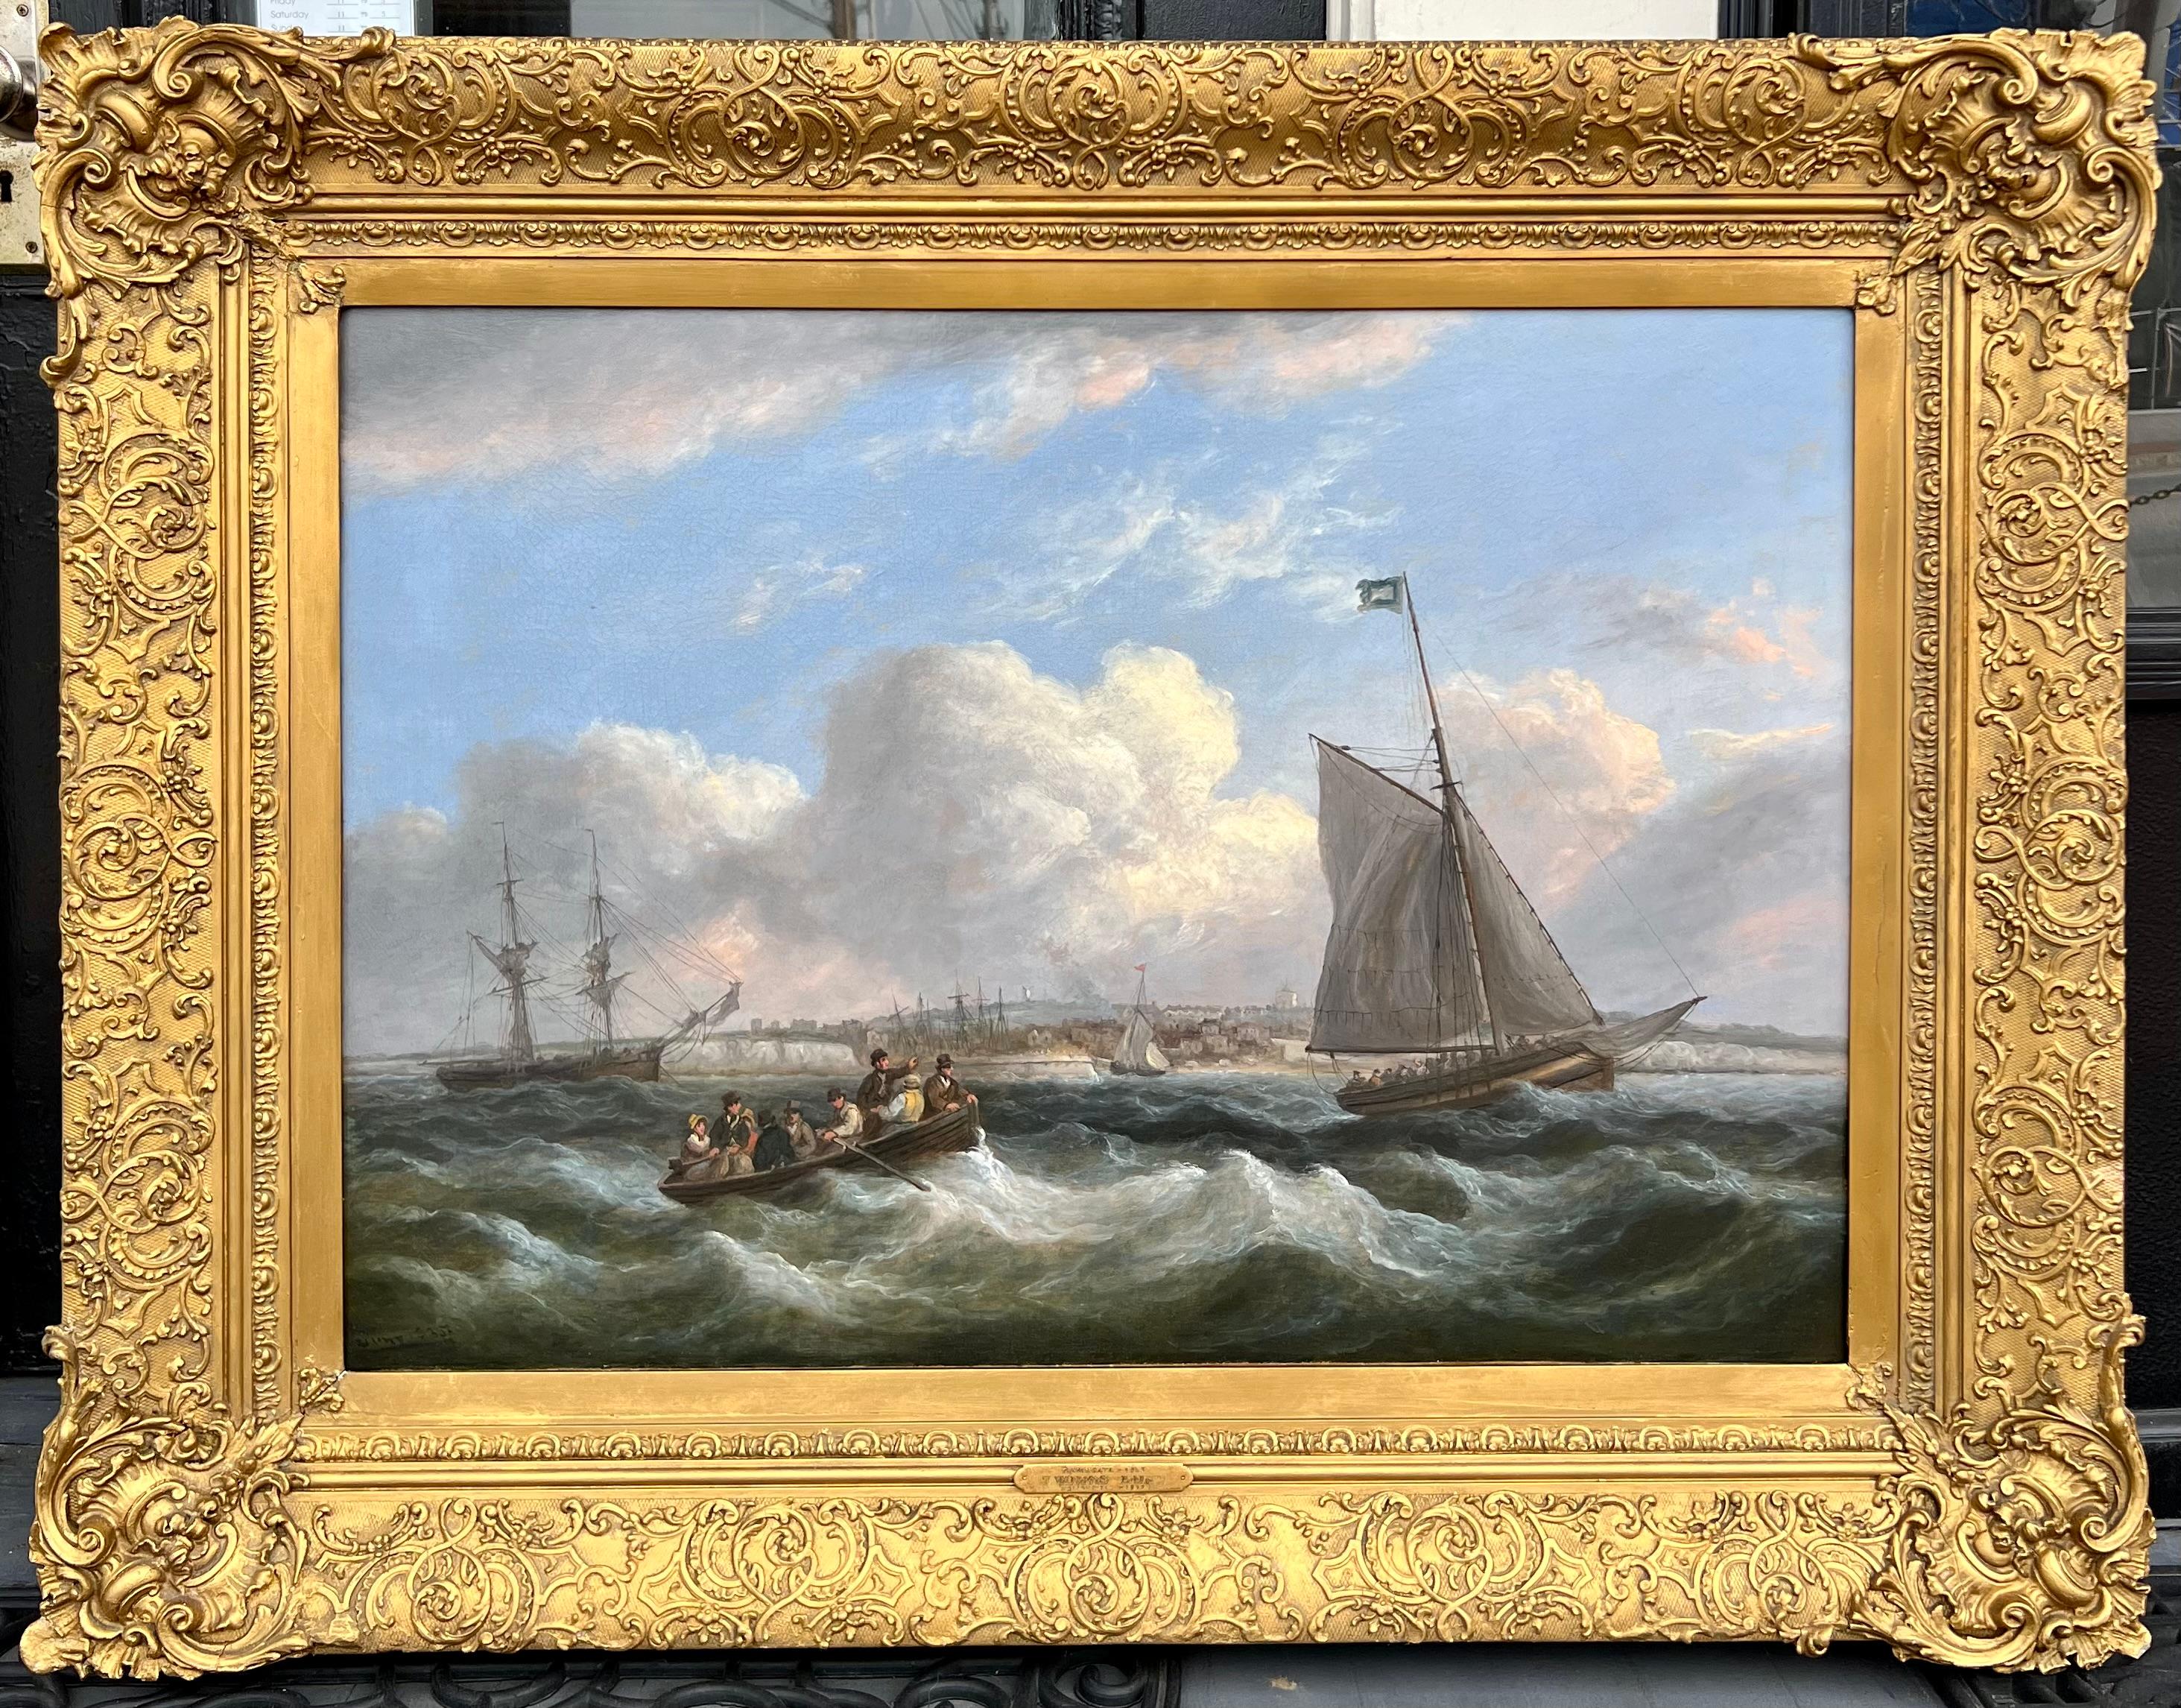 Shipping Off the Coast - Victorian Painting by Thomas Luny